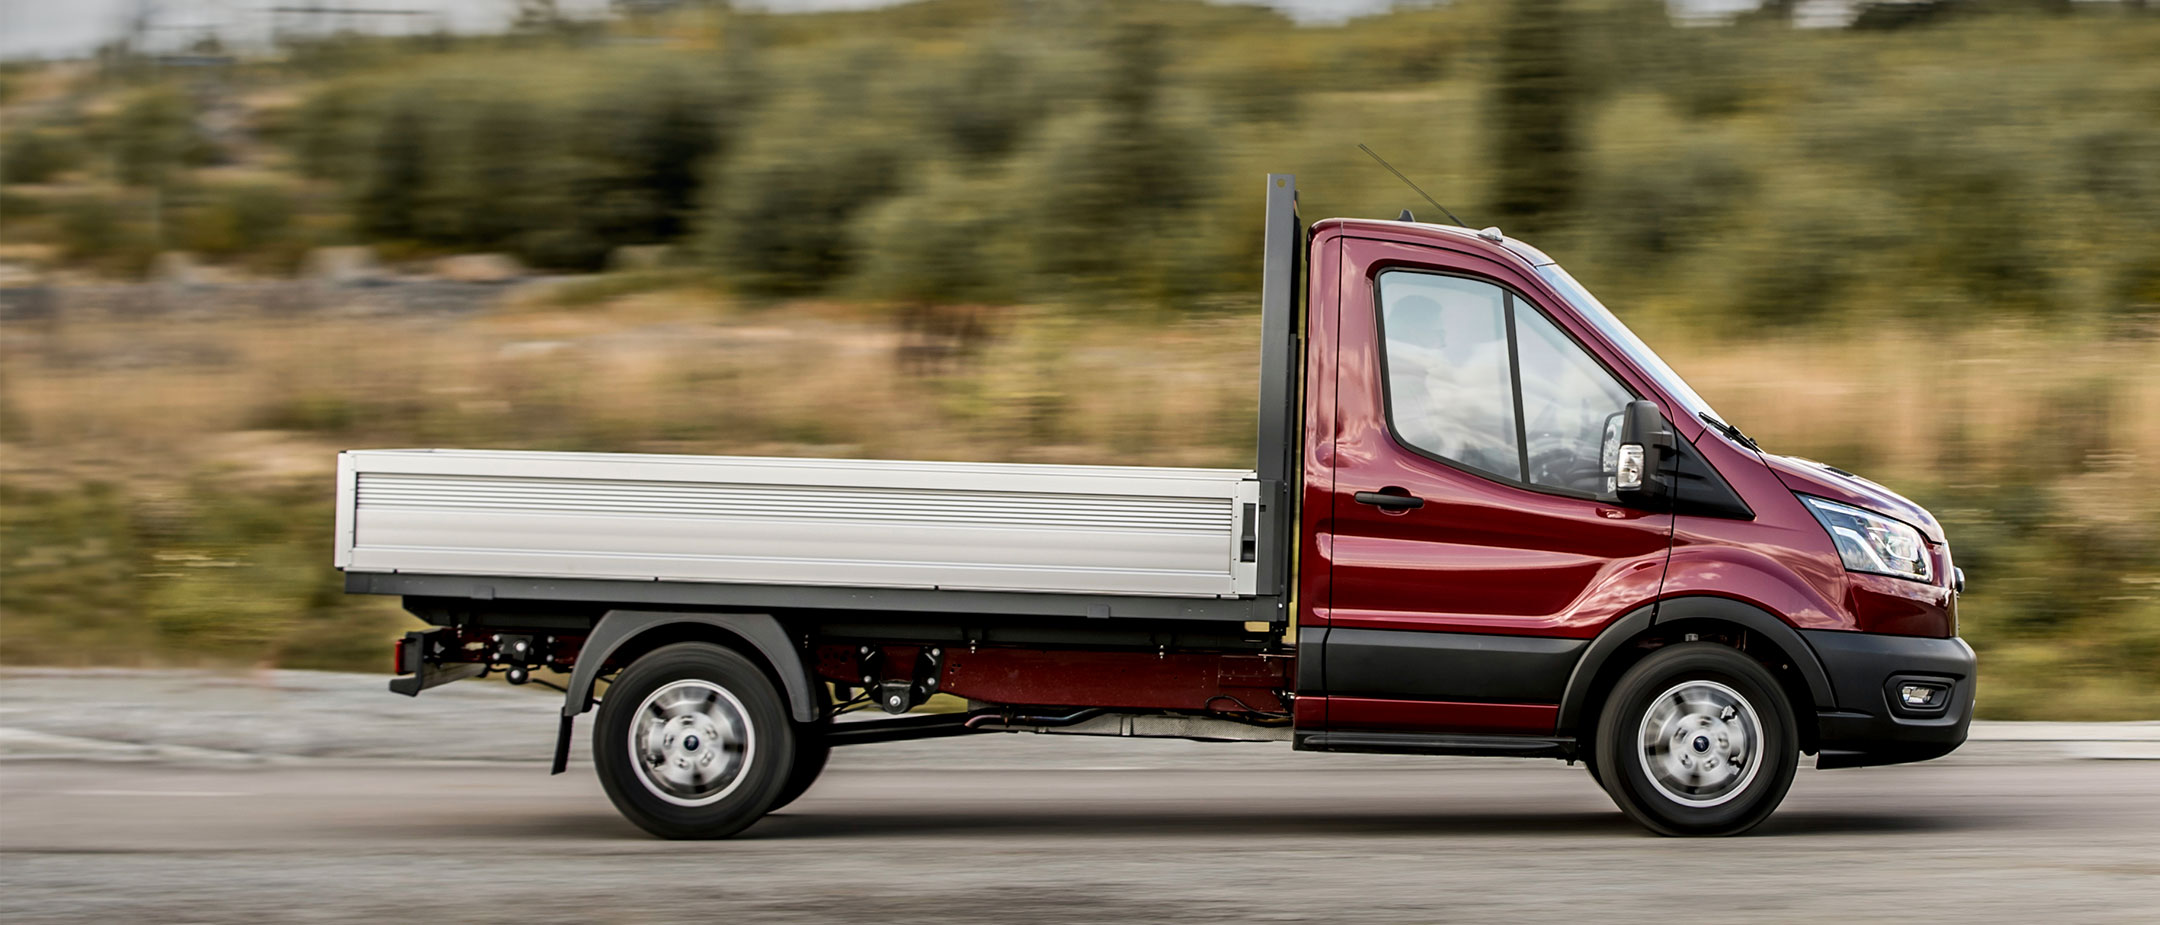 Transit Chassis Cab in motion side view